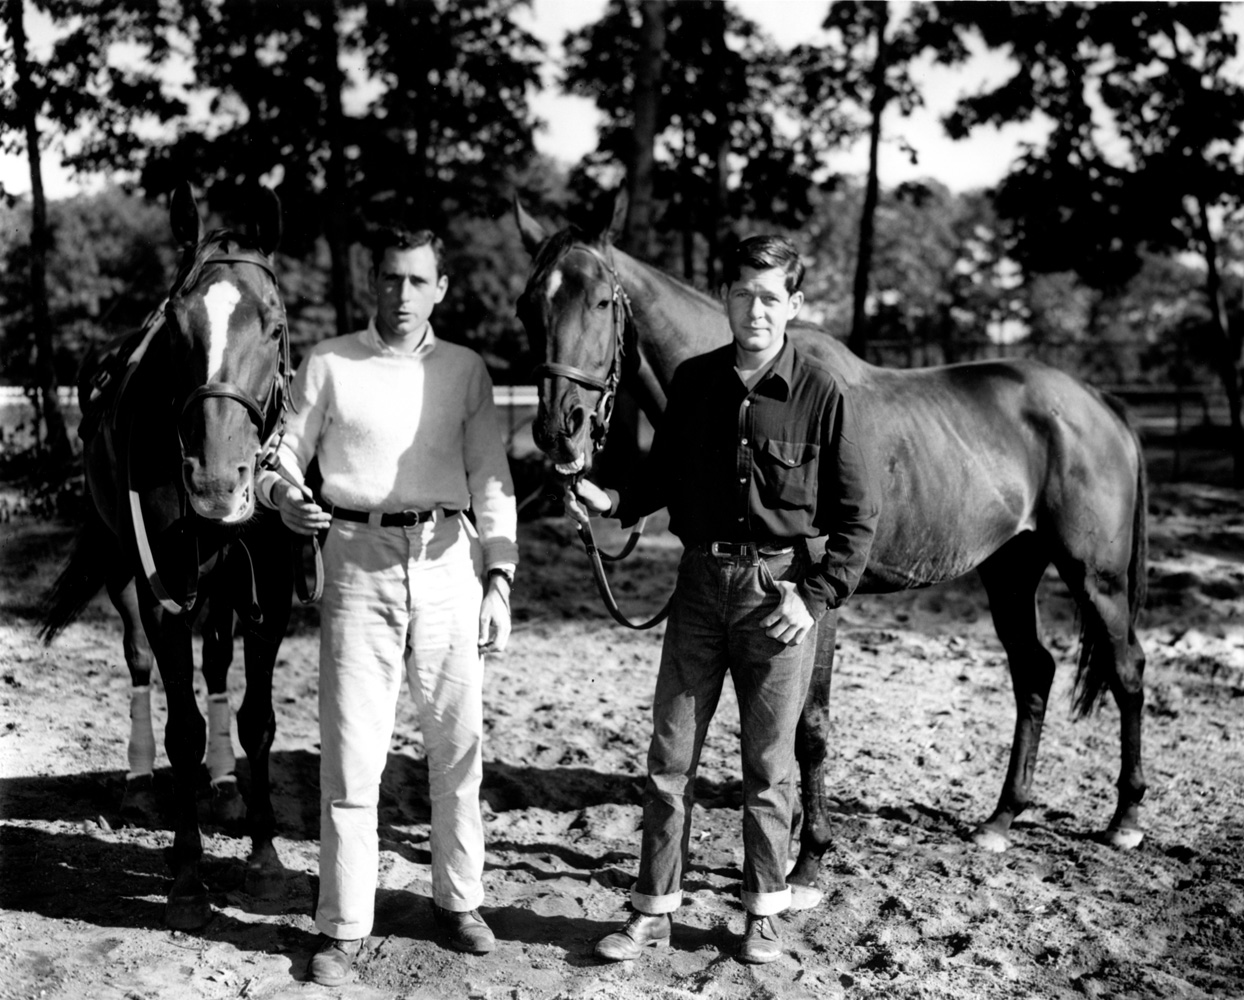 D.M. "Mikey" Smithwick holding Neji with brother A.P. "Paddy" Smithwick holding Ancestor at Belmont, September 1957 (Keeneland Library Morgan Collection/Museum Collection)